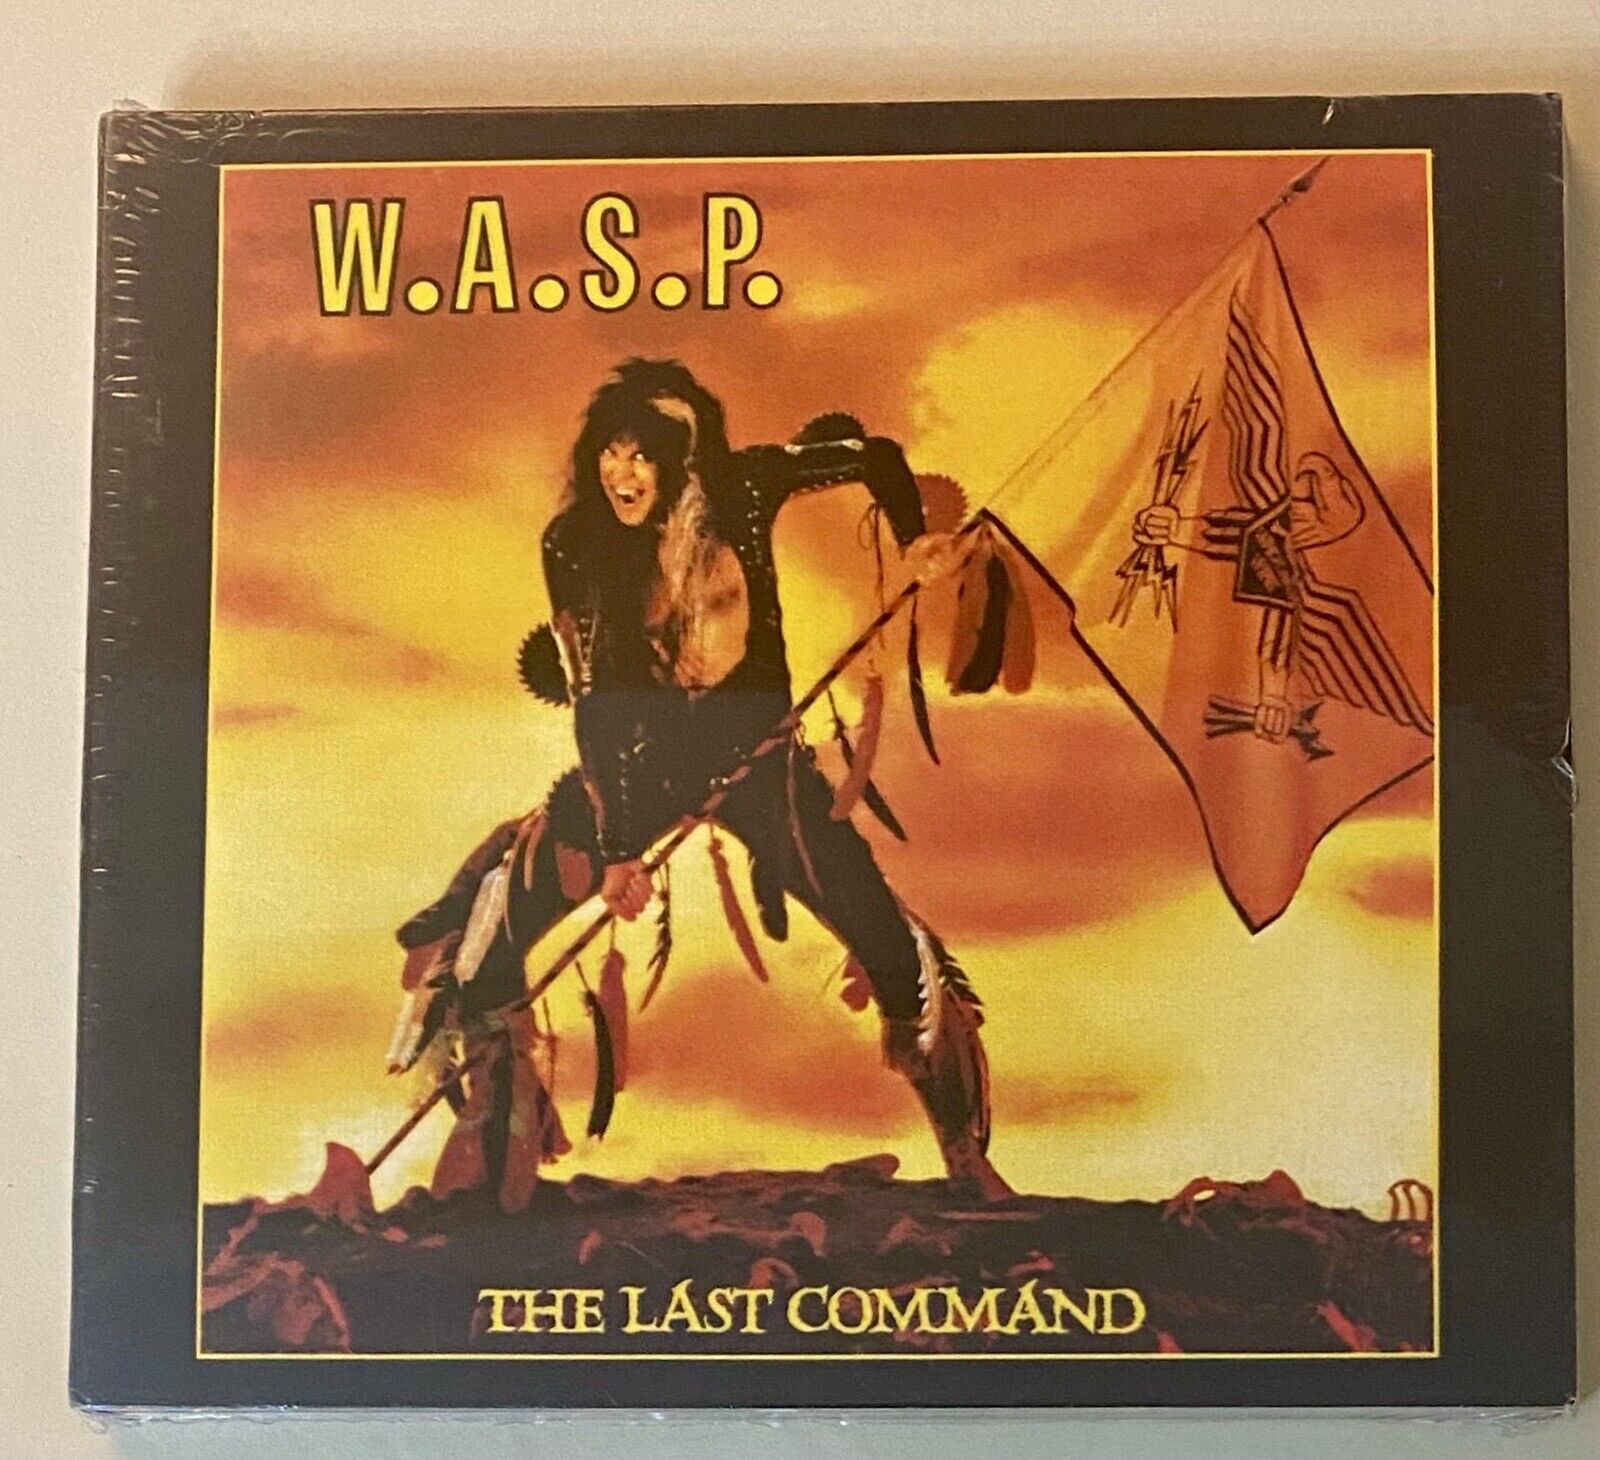 WASP The Last Command CD Original Recording Remastered - NEW SEALED